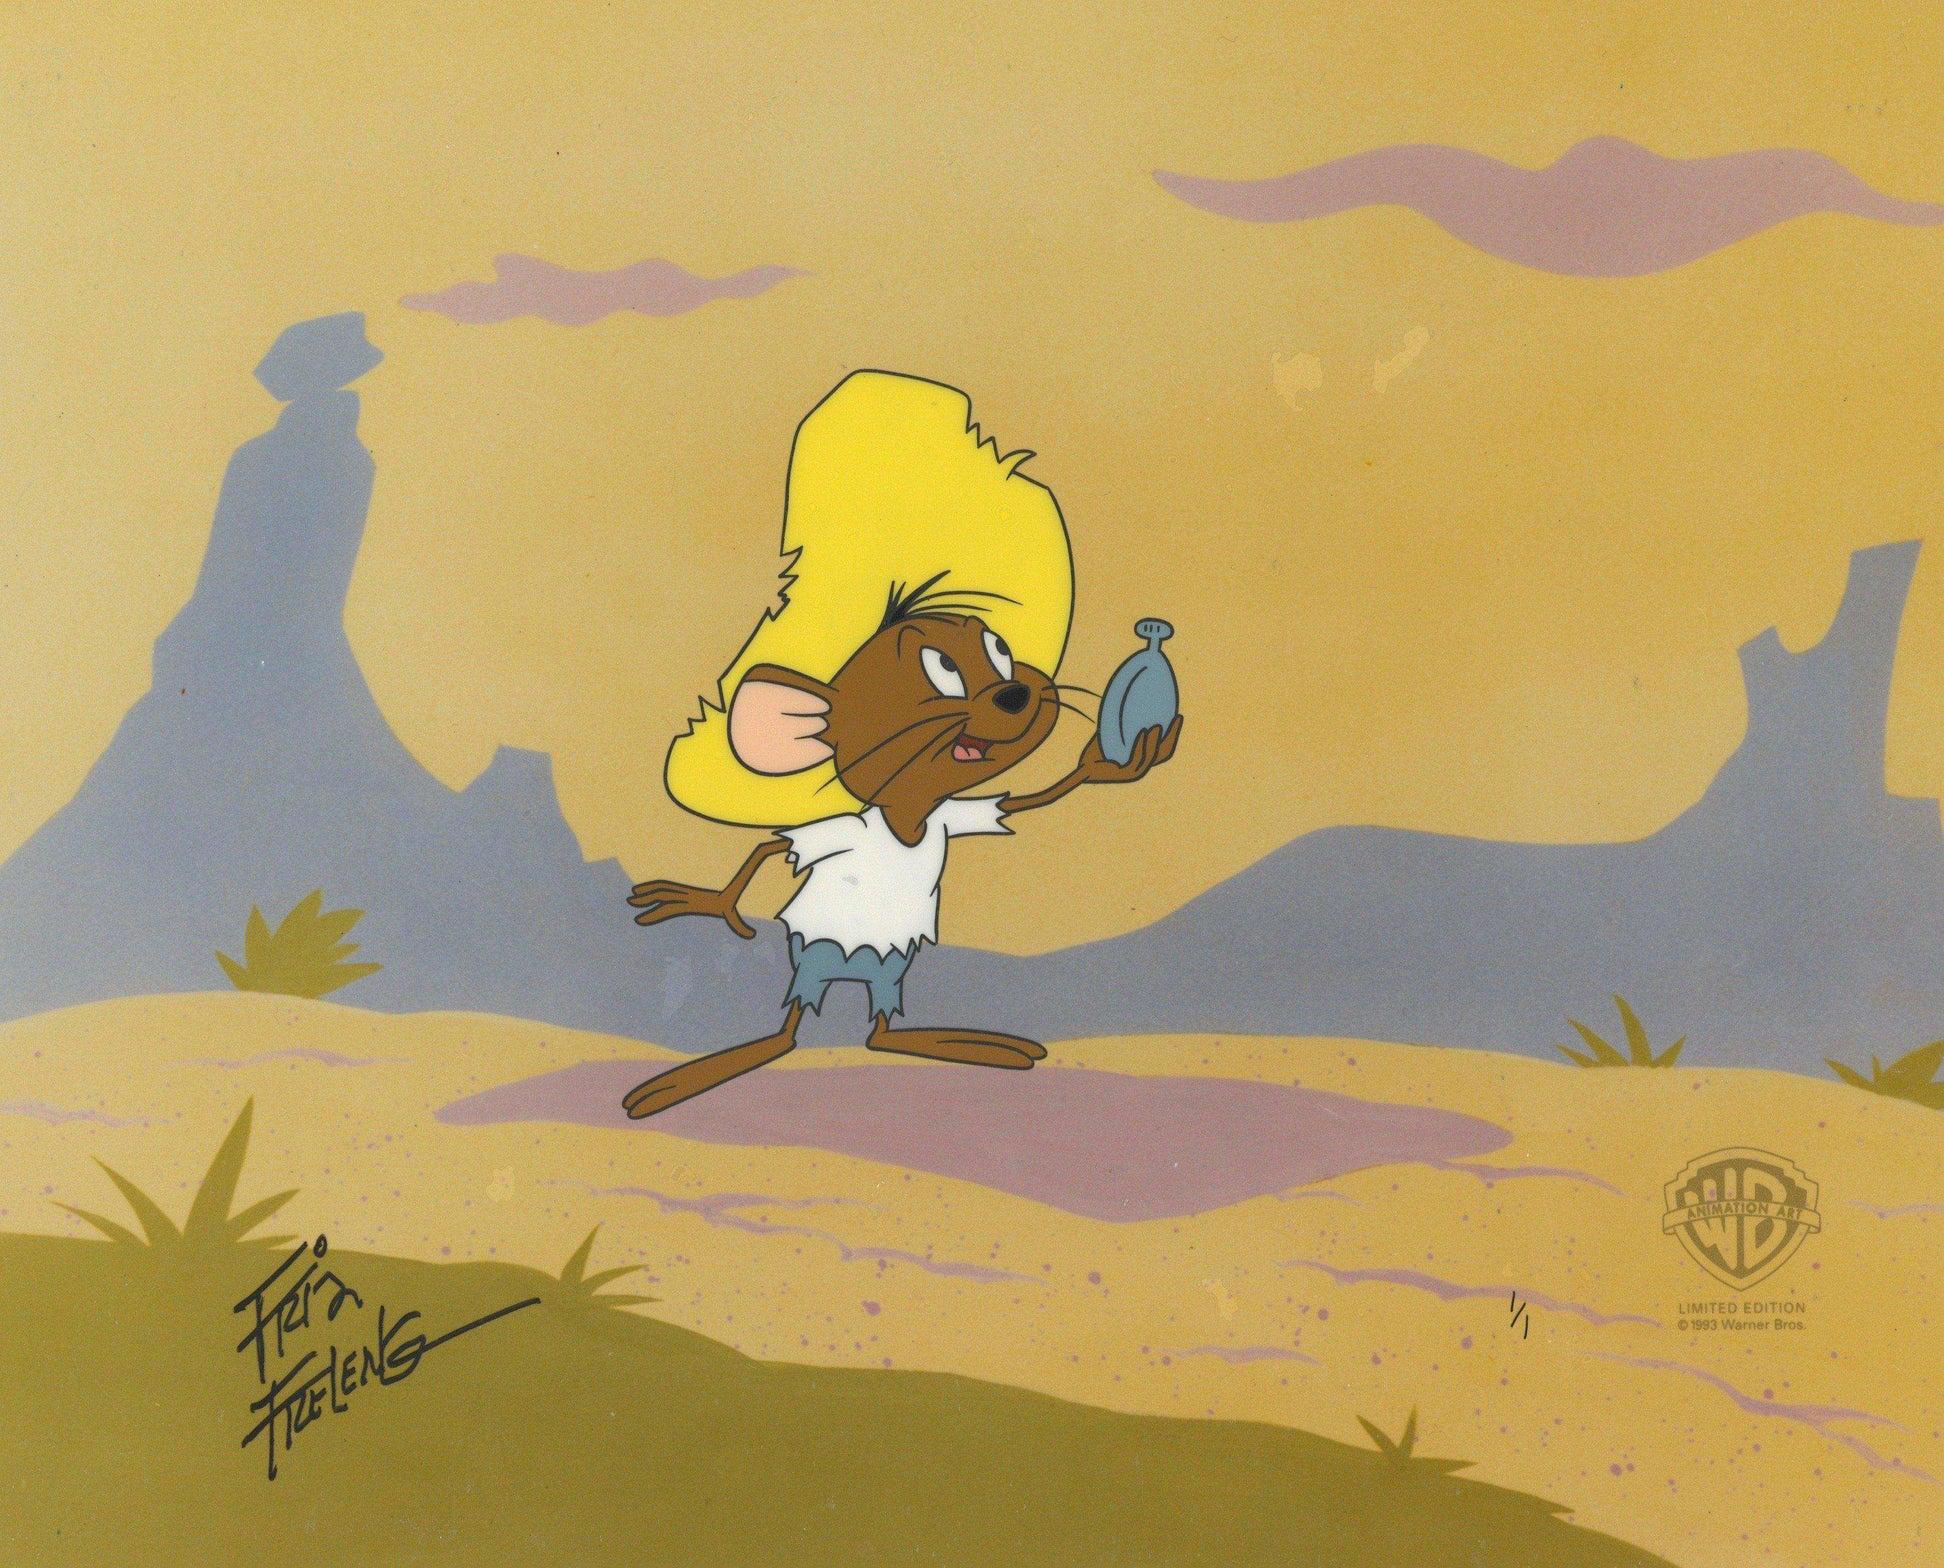 Looney Tunes Original Production Cel with Matching Drawing: Speedy Gonzales - Art by Friz Freleng